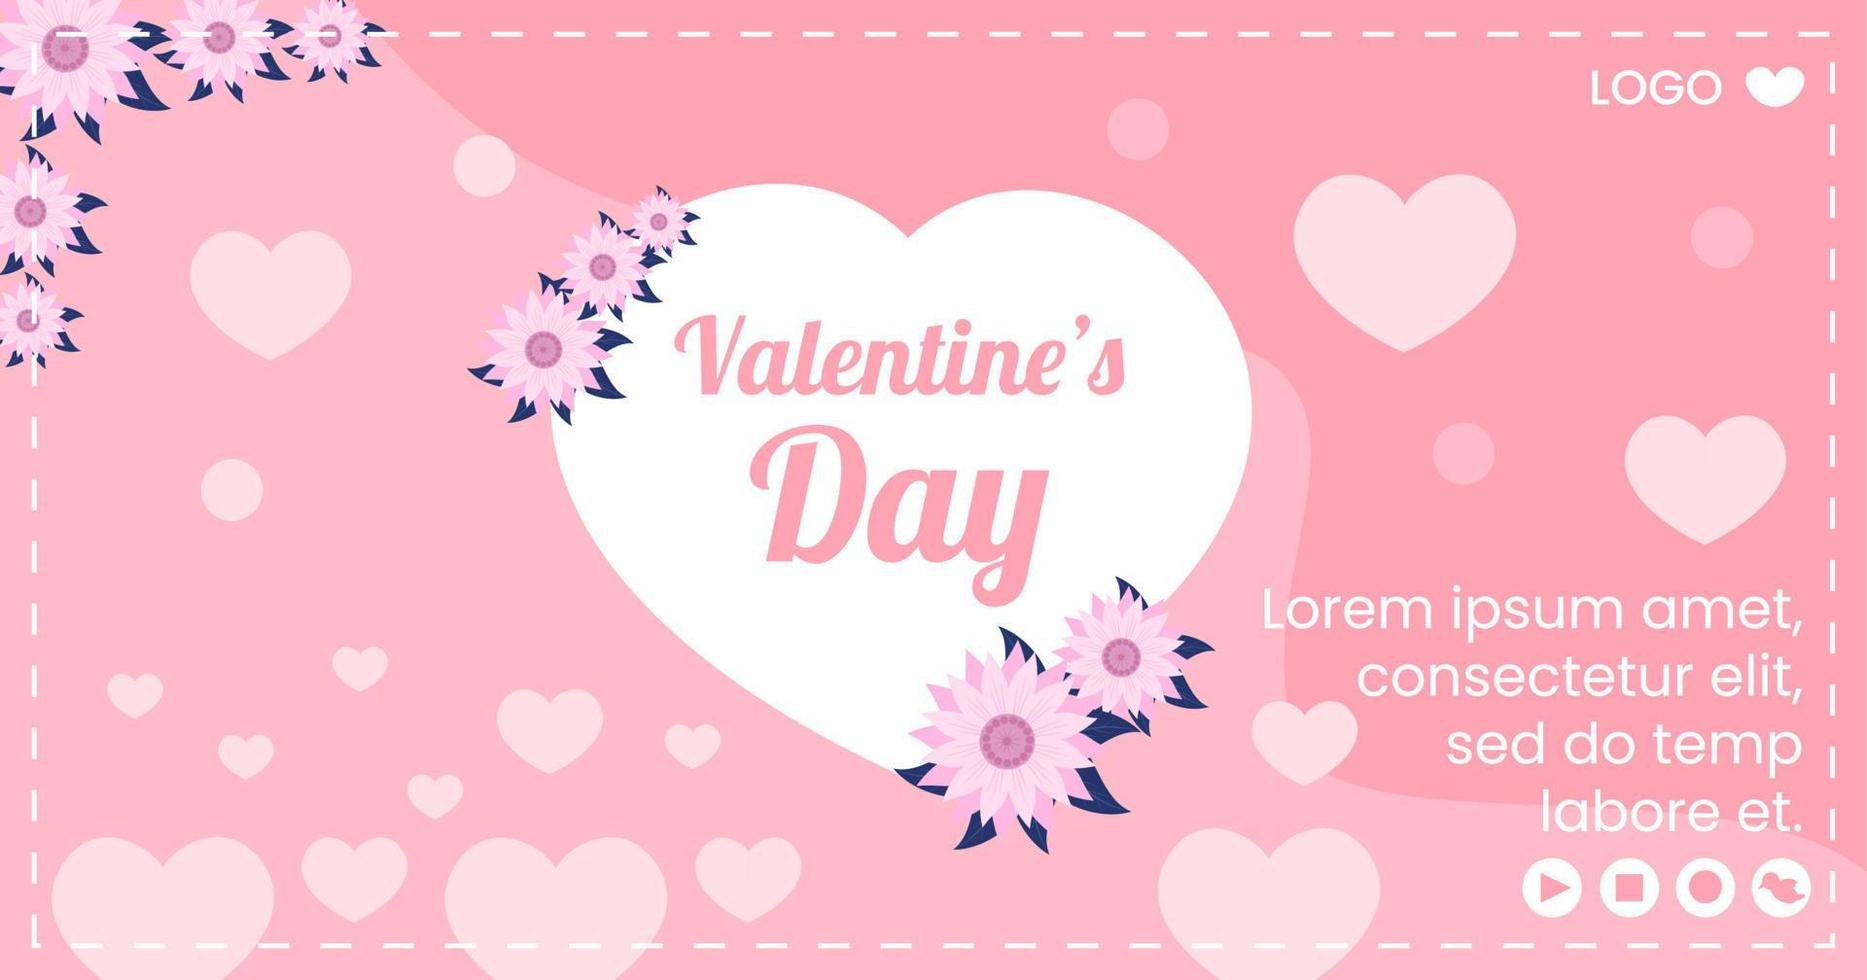 Happy Valentine's Day Post Template Flat Design Illustration Editable of Square Background for Social media, Love Greeting Card or Banner vector